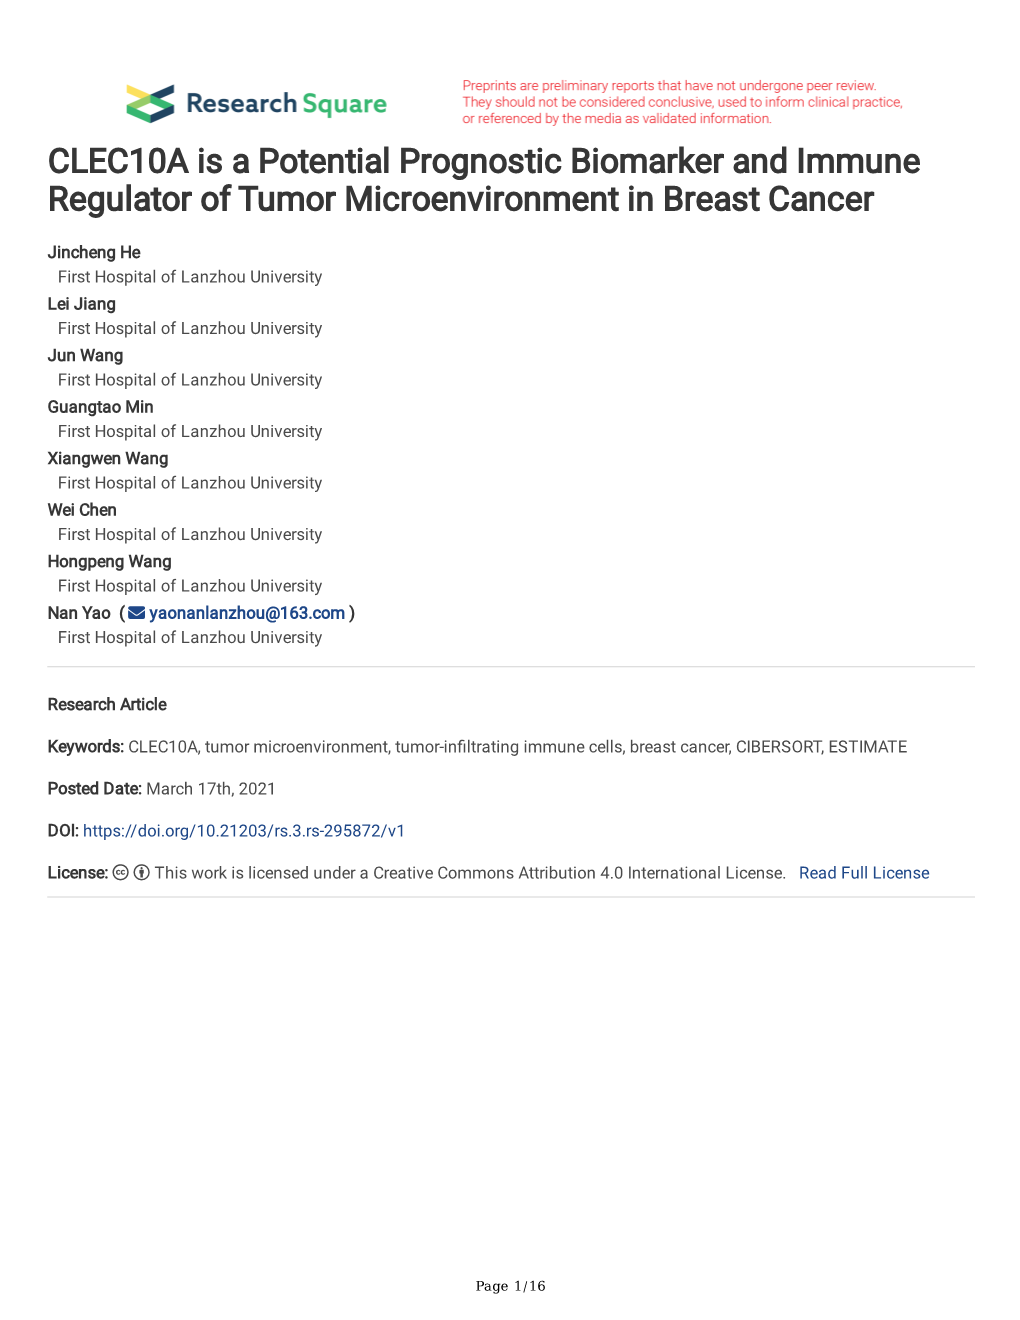 CLEC10A Is a Potential Prognostic Biomarker and Immune Regulator of Tumor Microenvironment in Breast Cancer